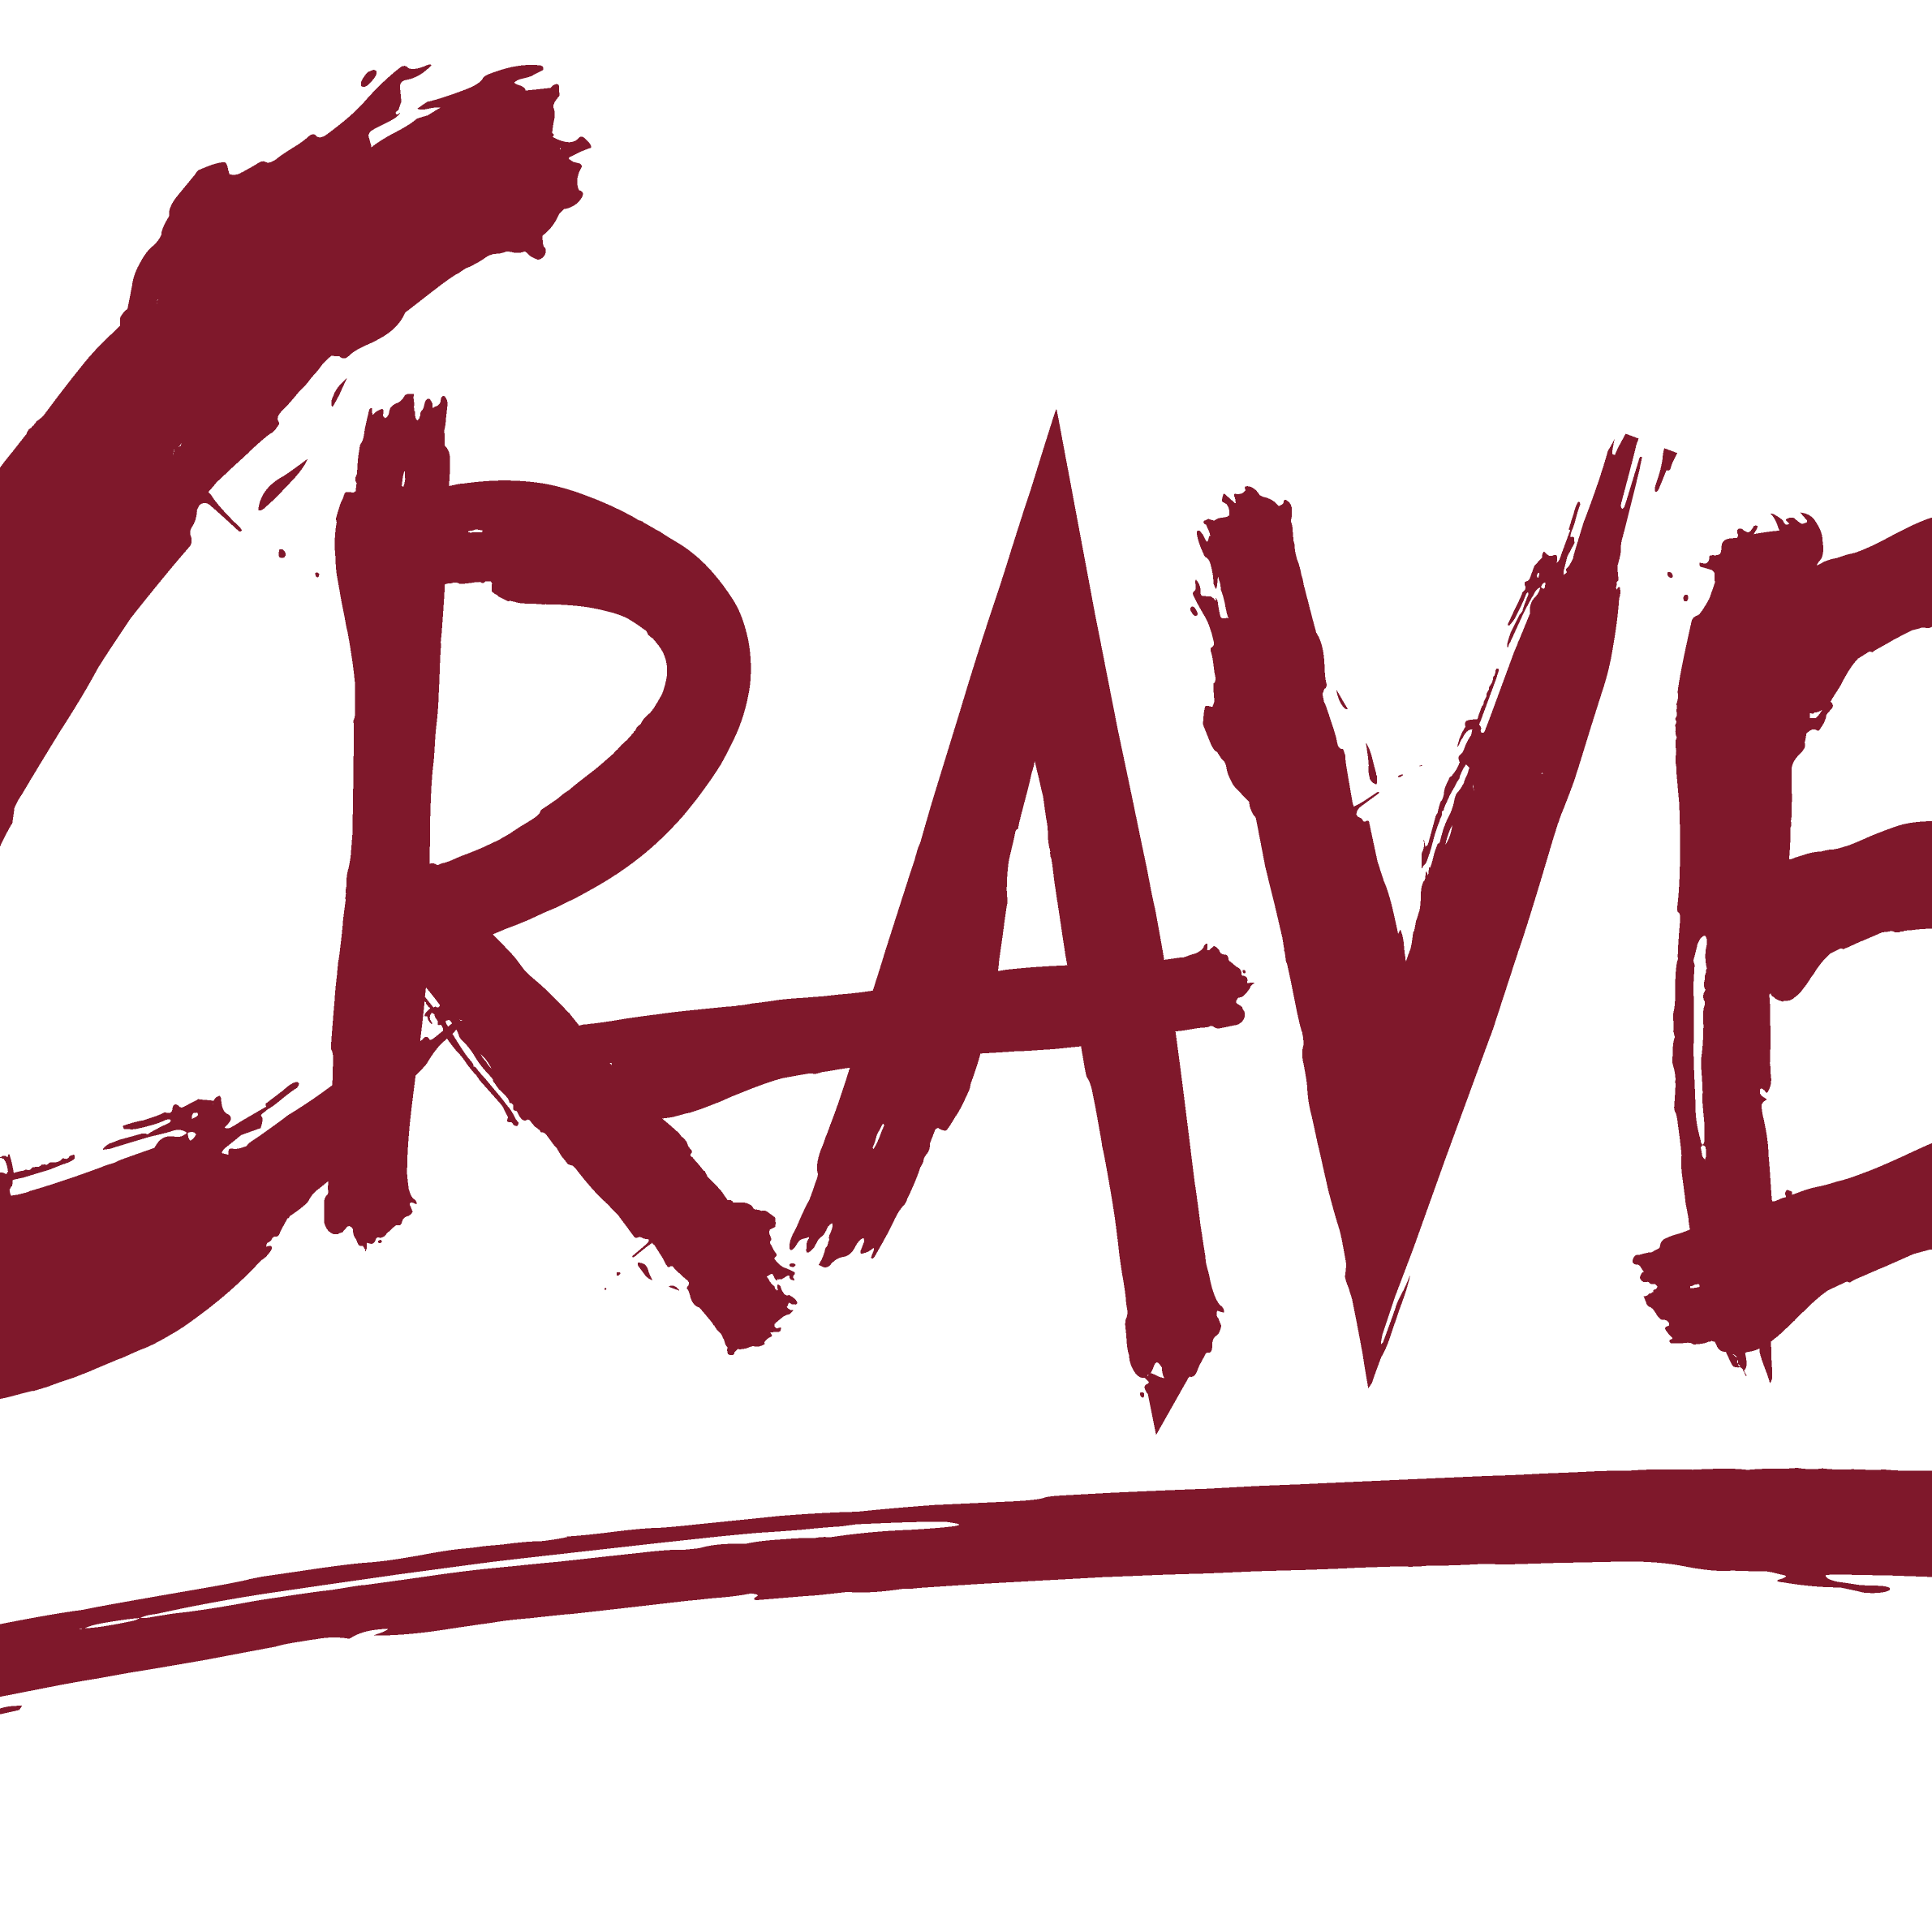 Restaurant Catering Crave Others Logo Events PNG Image